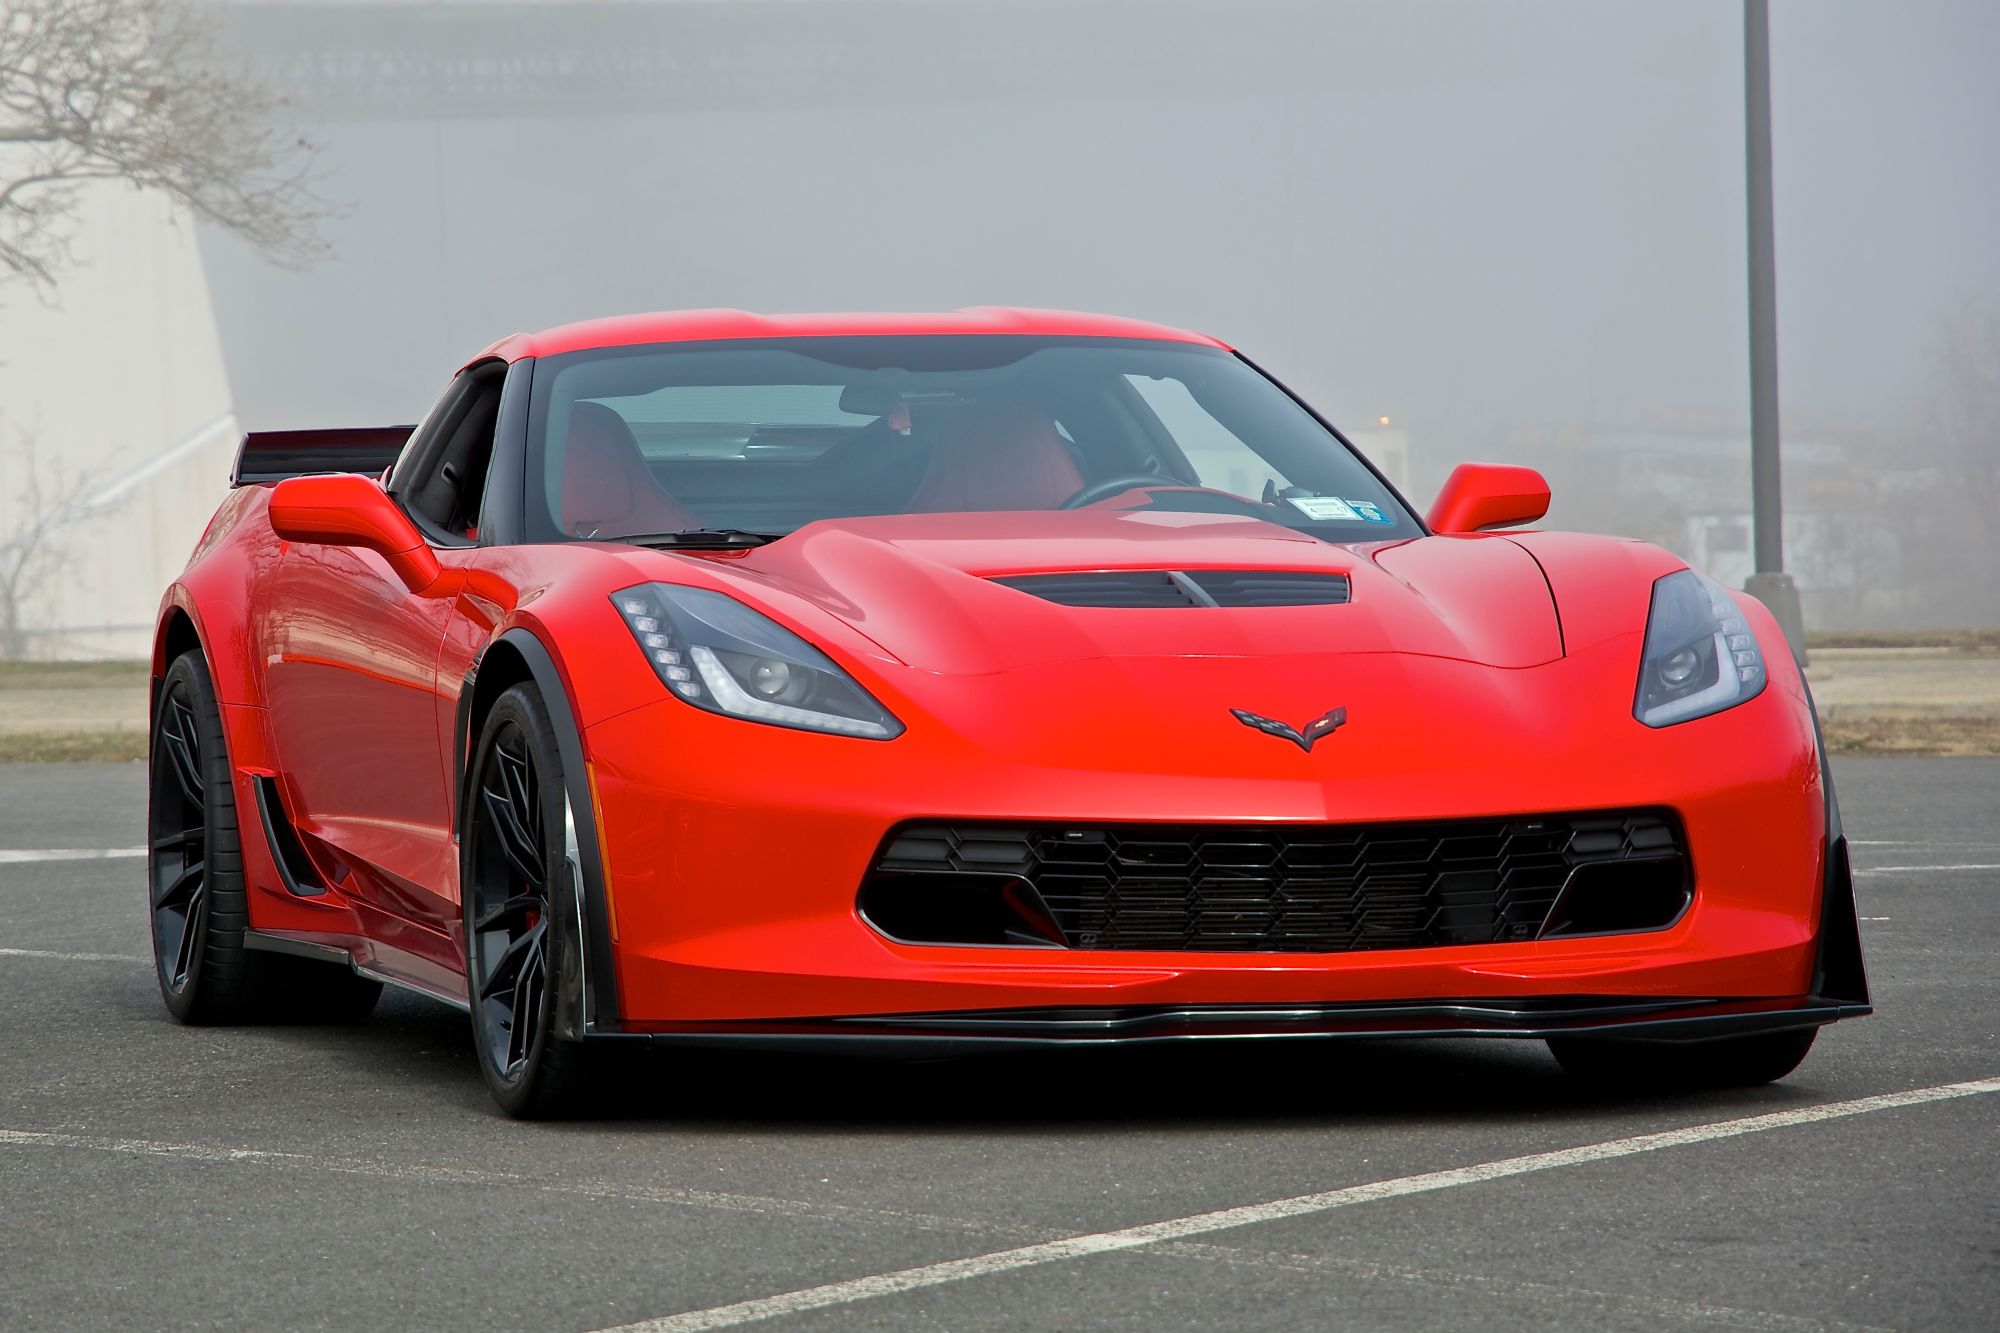 What you should know about buying a Corvette with cash